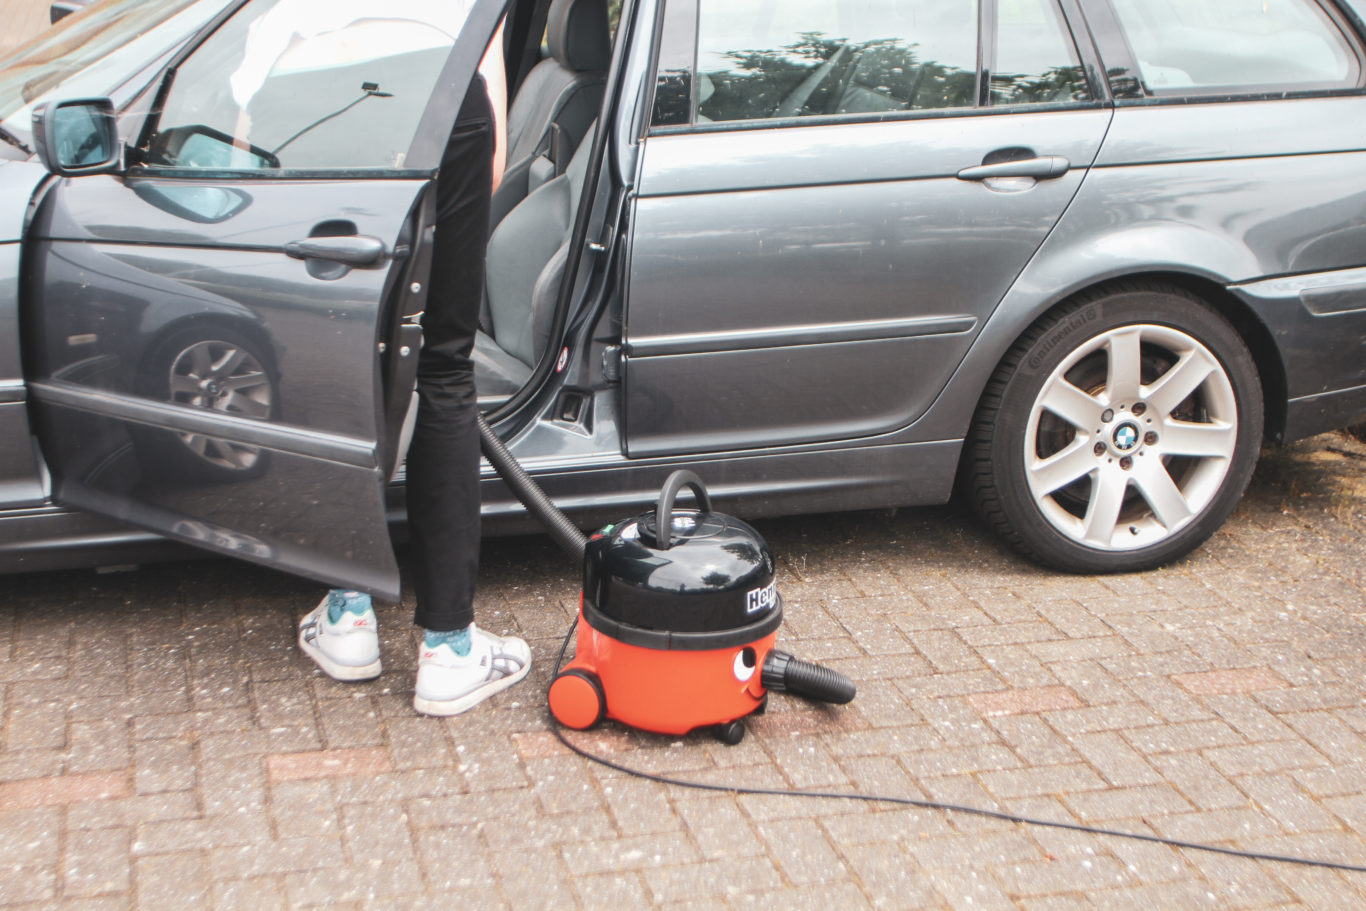 The Henry is a tried-and-tested car vacuum